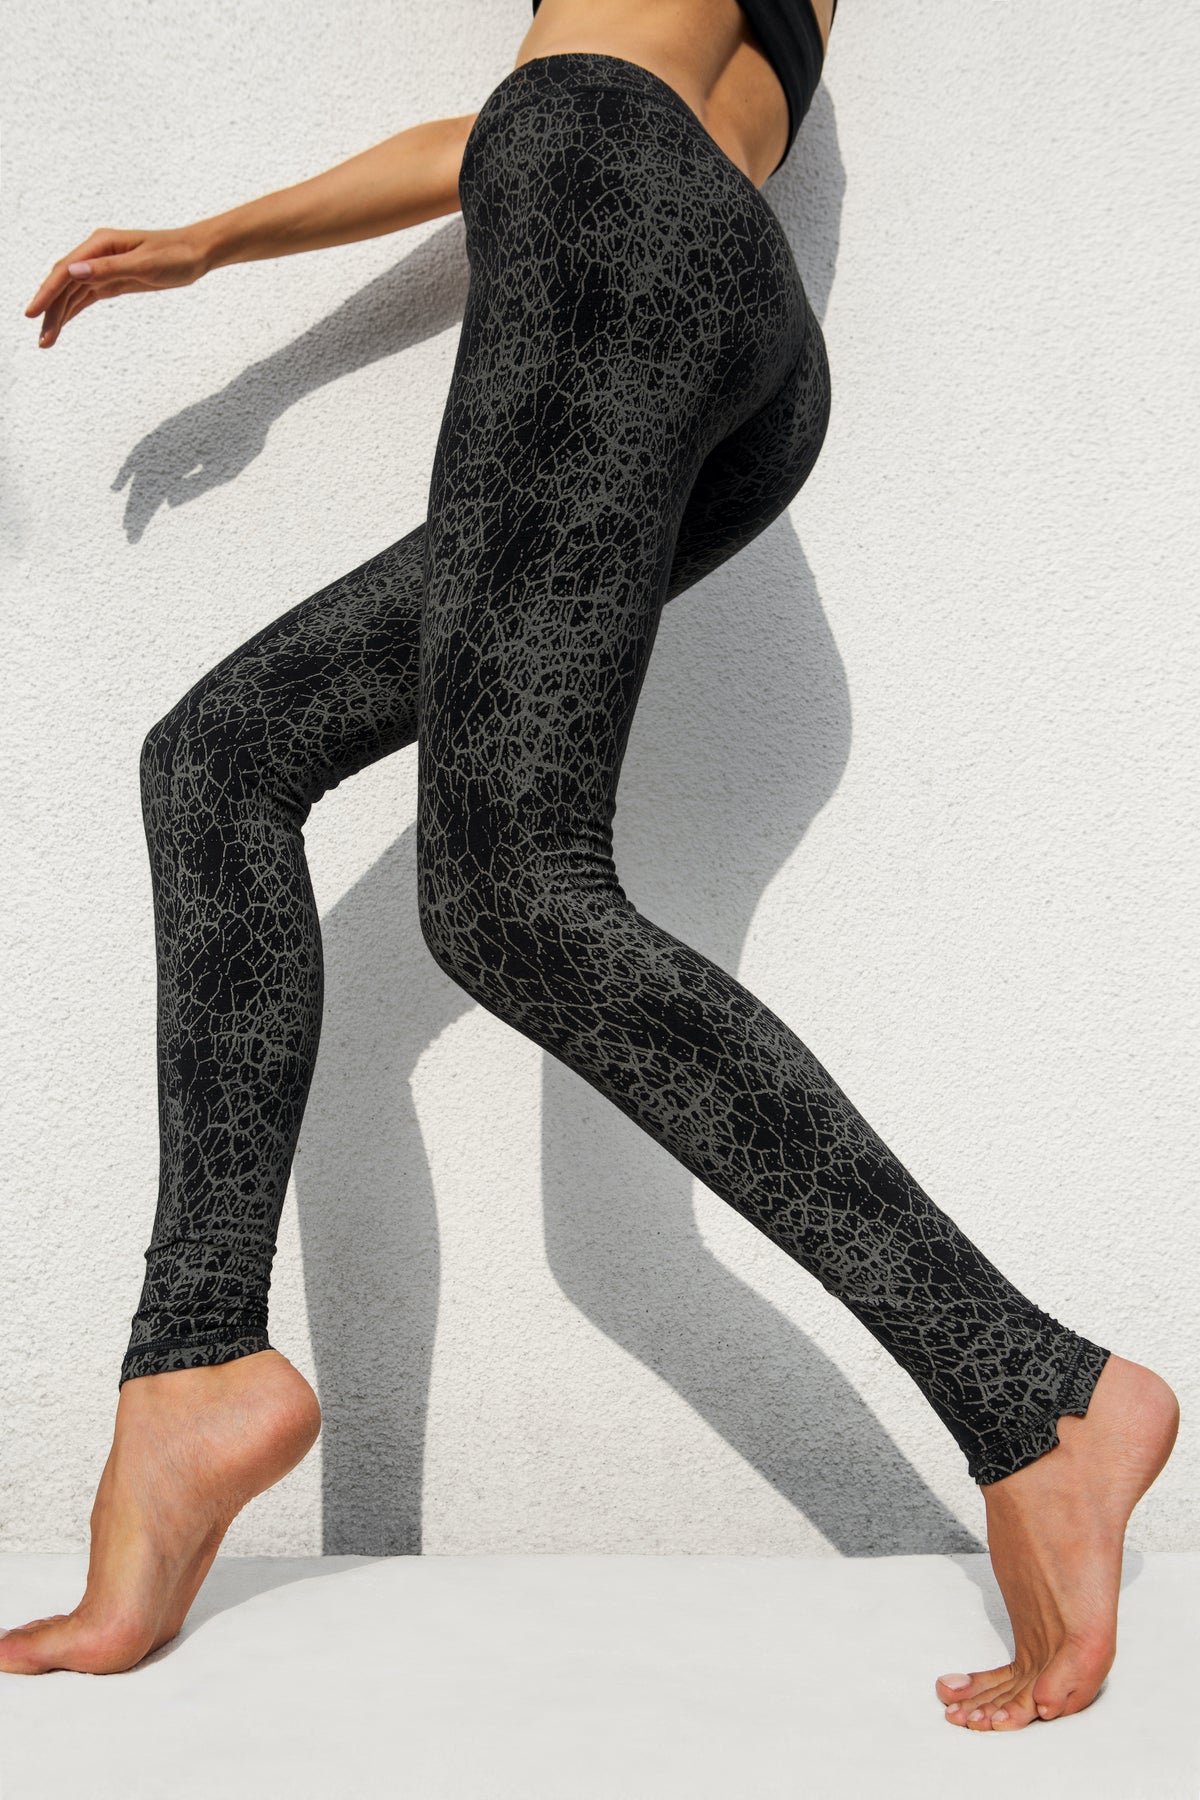 Funky Simplicity - Perfect for training, yoga and or for Halloween! 👻 🎃  🛍️ Cactus Leggings grey black 🖤    🛍️ Top 🖤